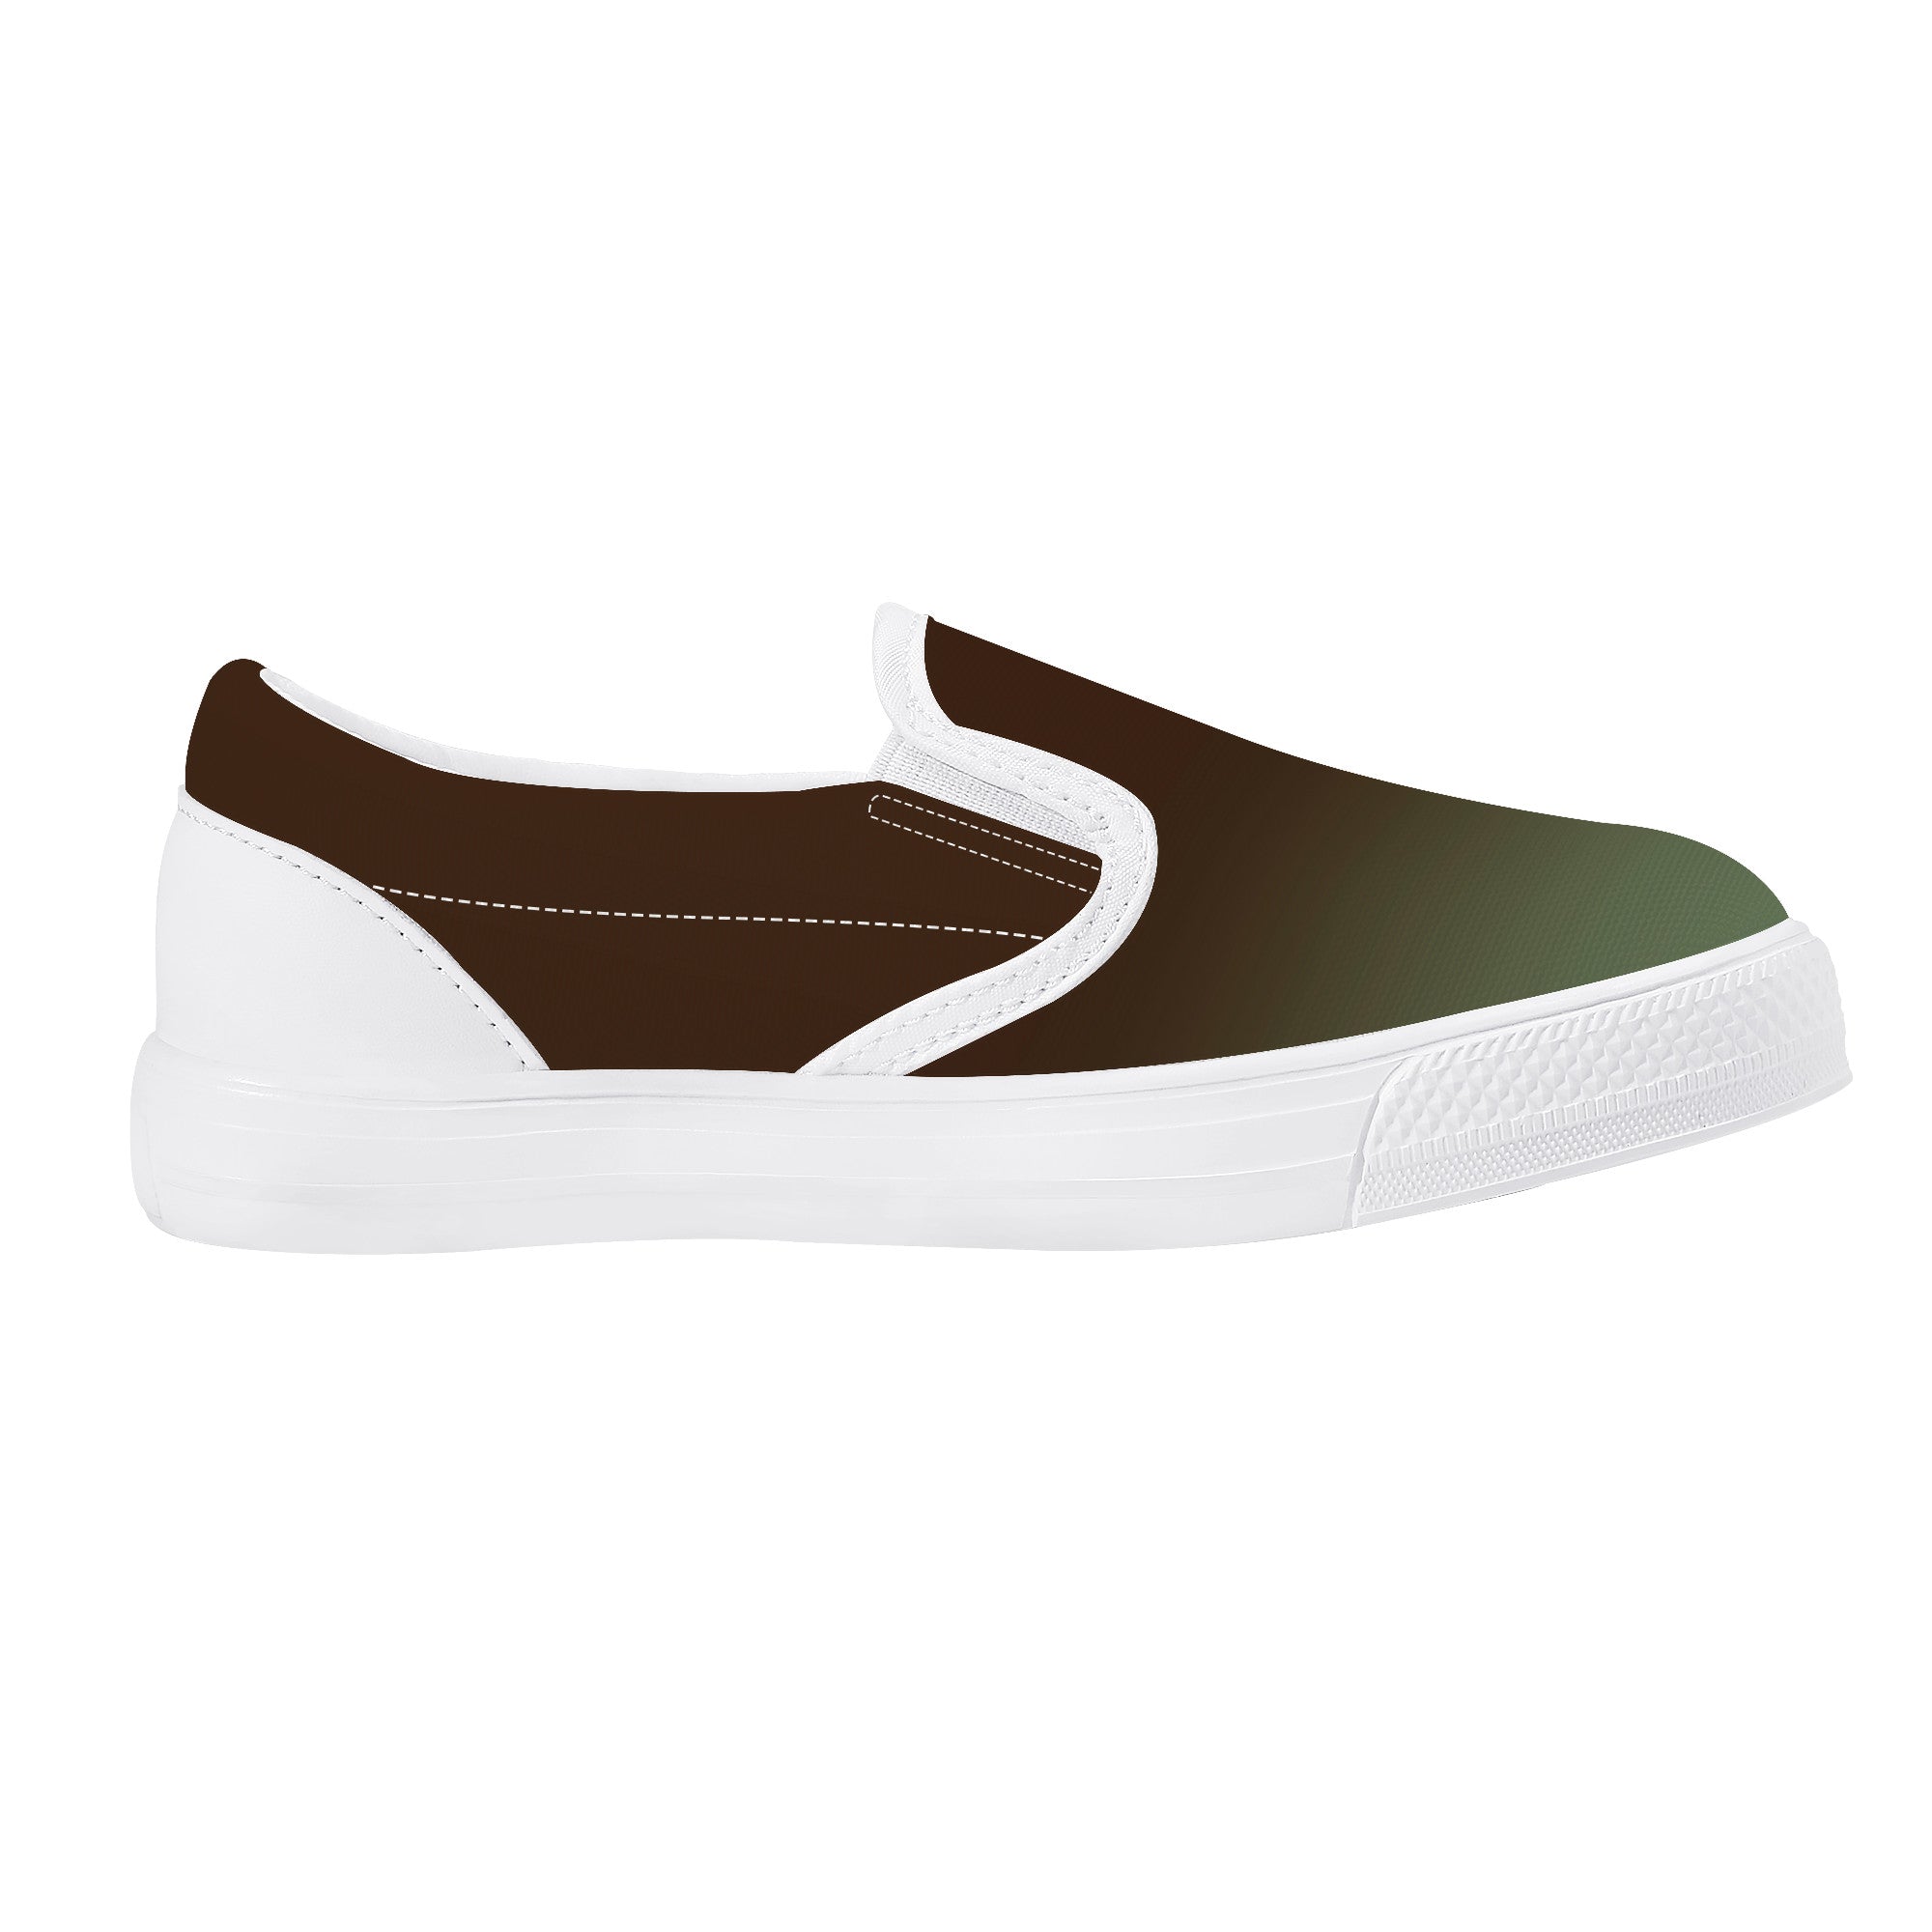 Yoga Shoes - Kids Slip-on shoes - White - Personal Hour for Yoga and Meditations 